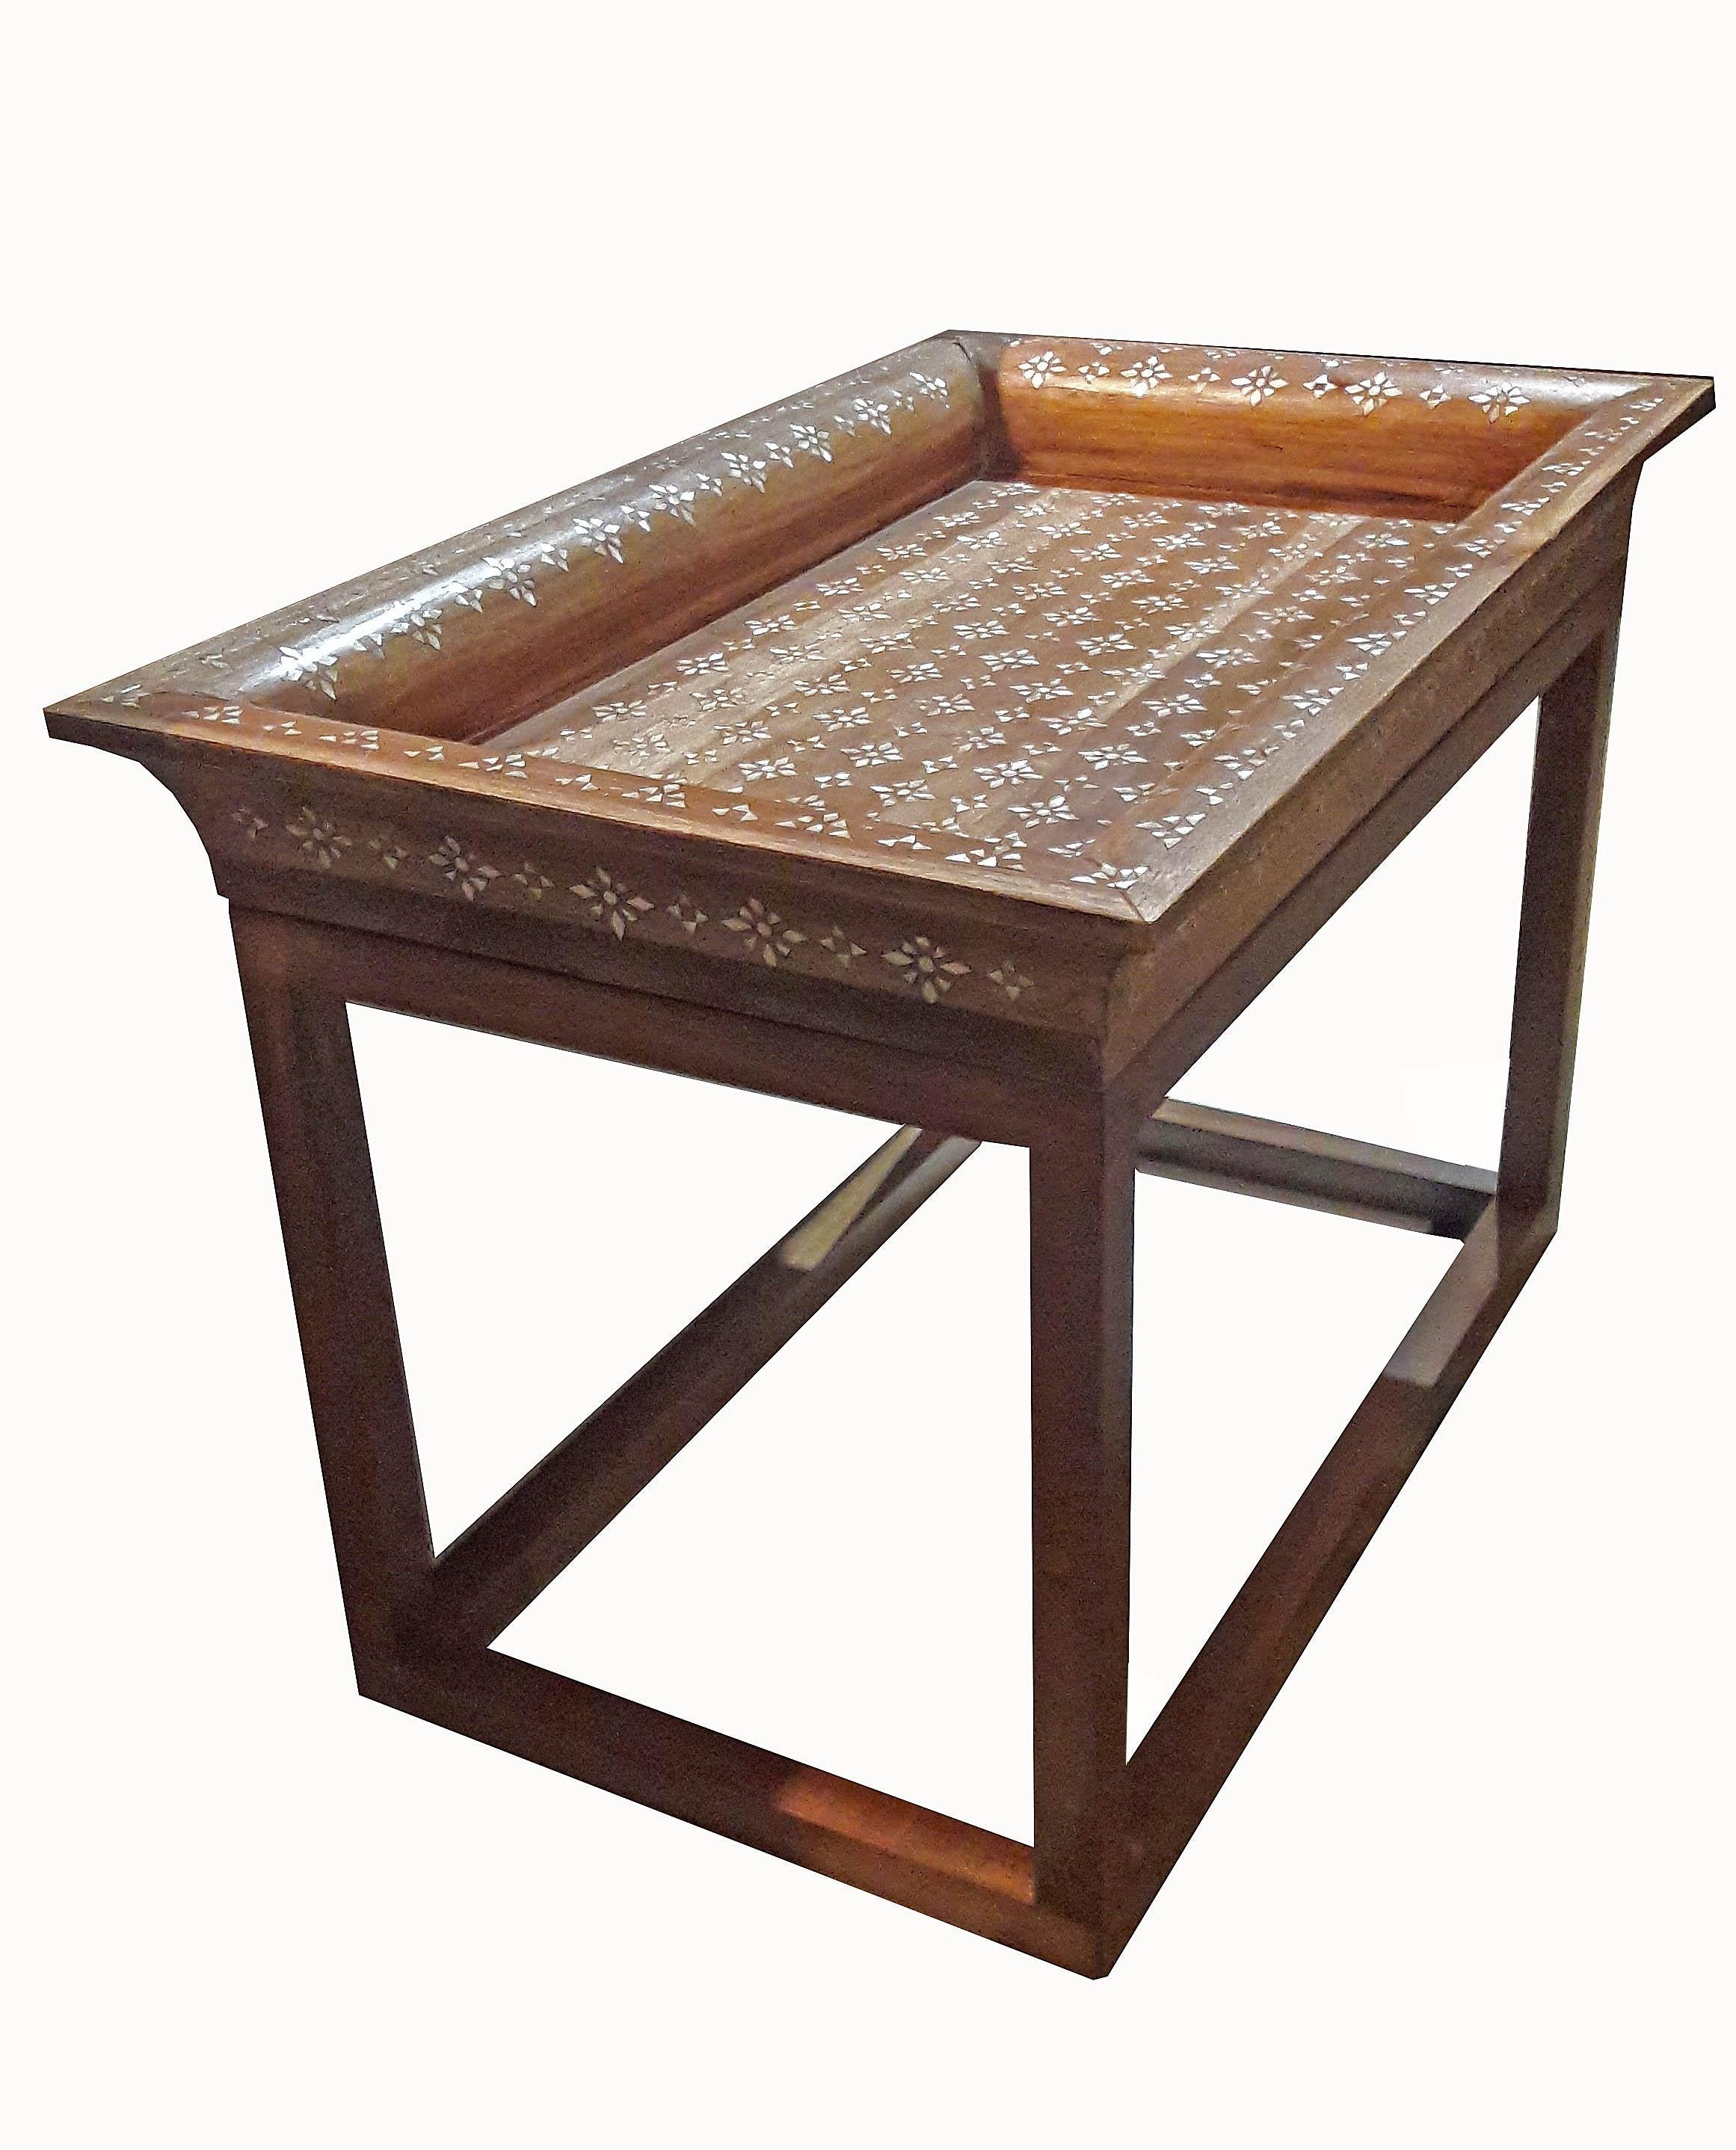 tables from india